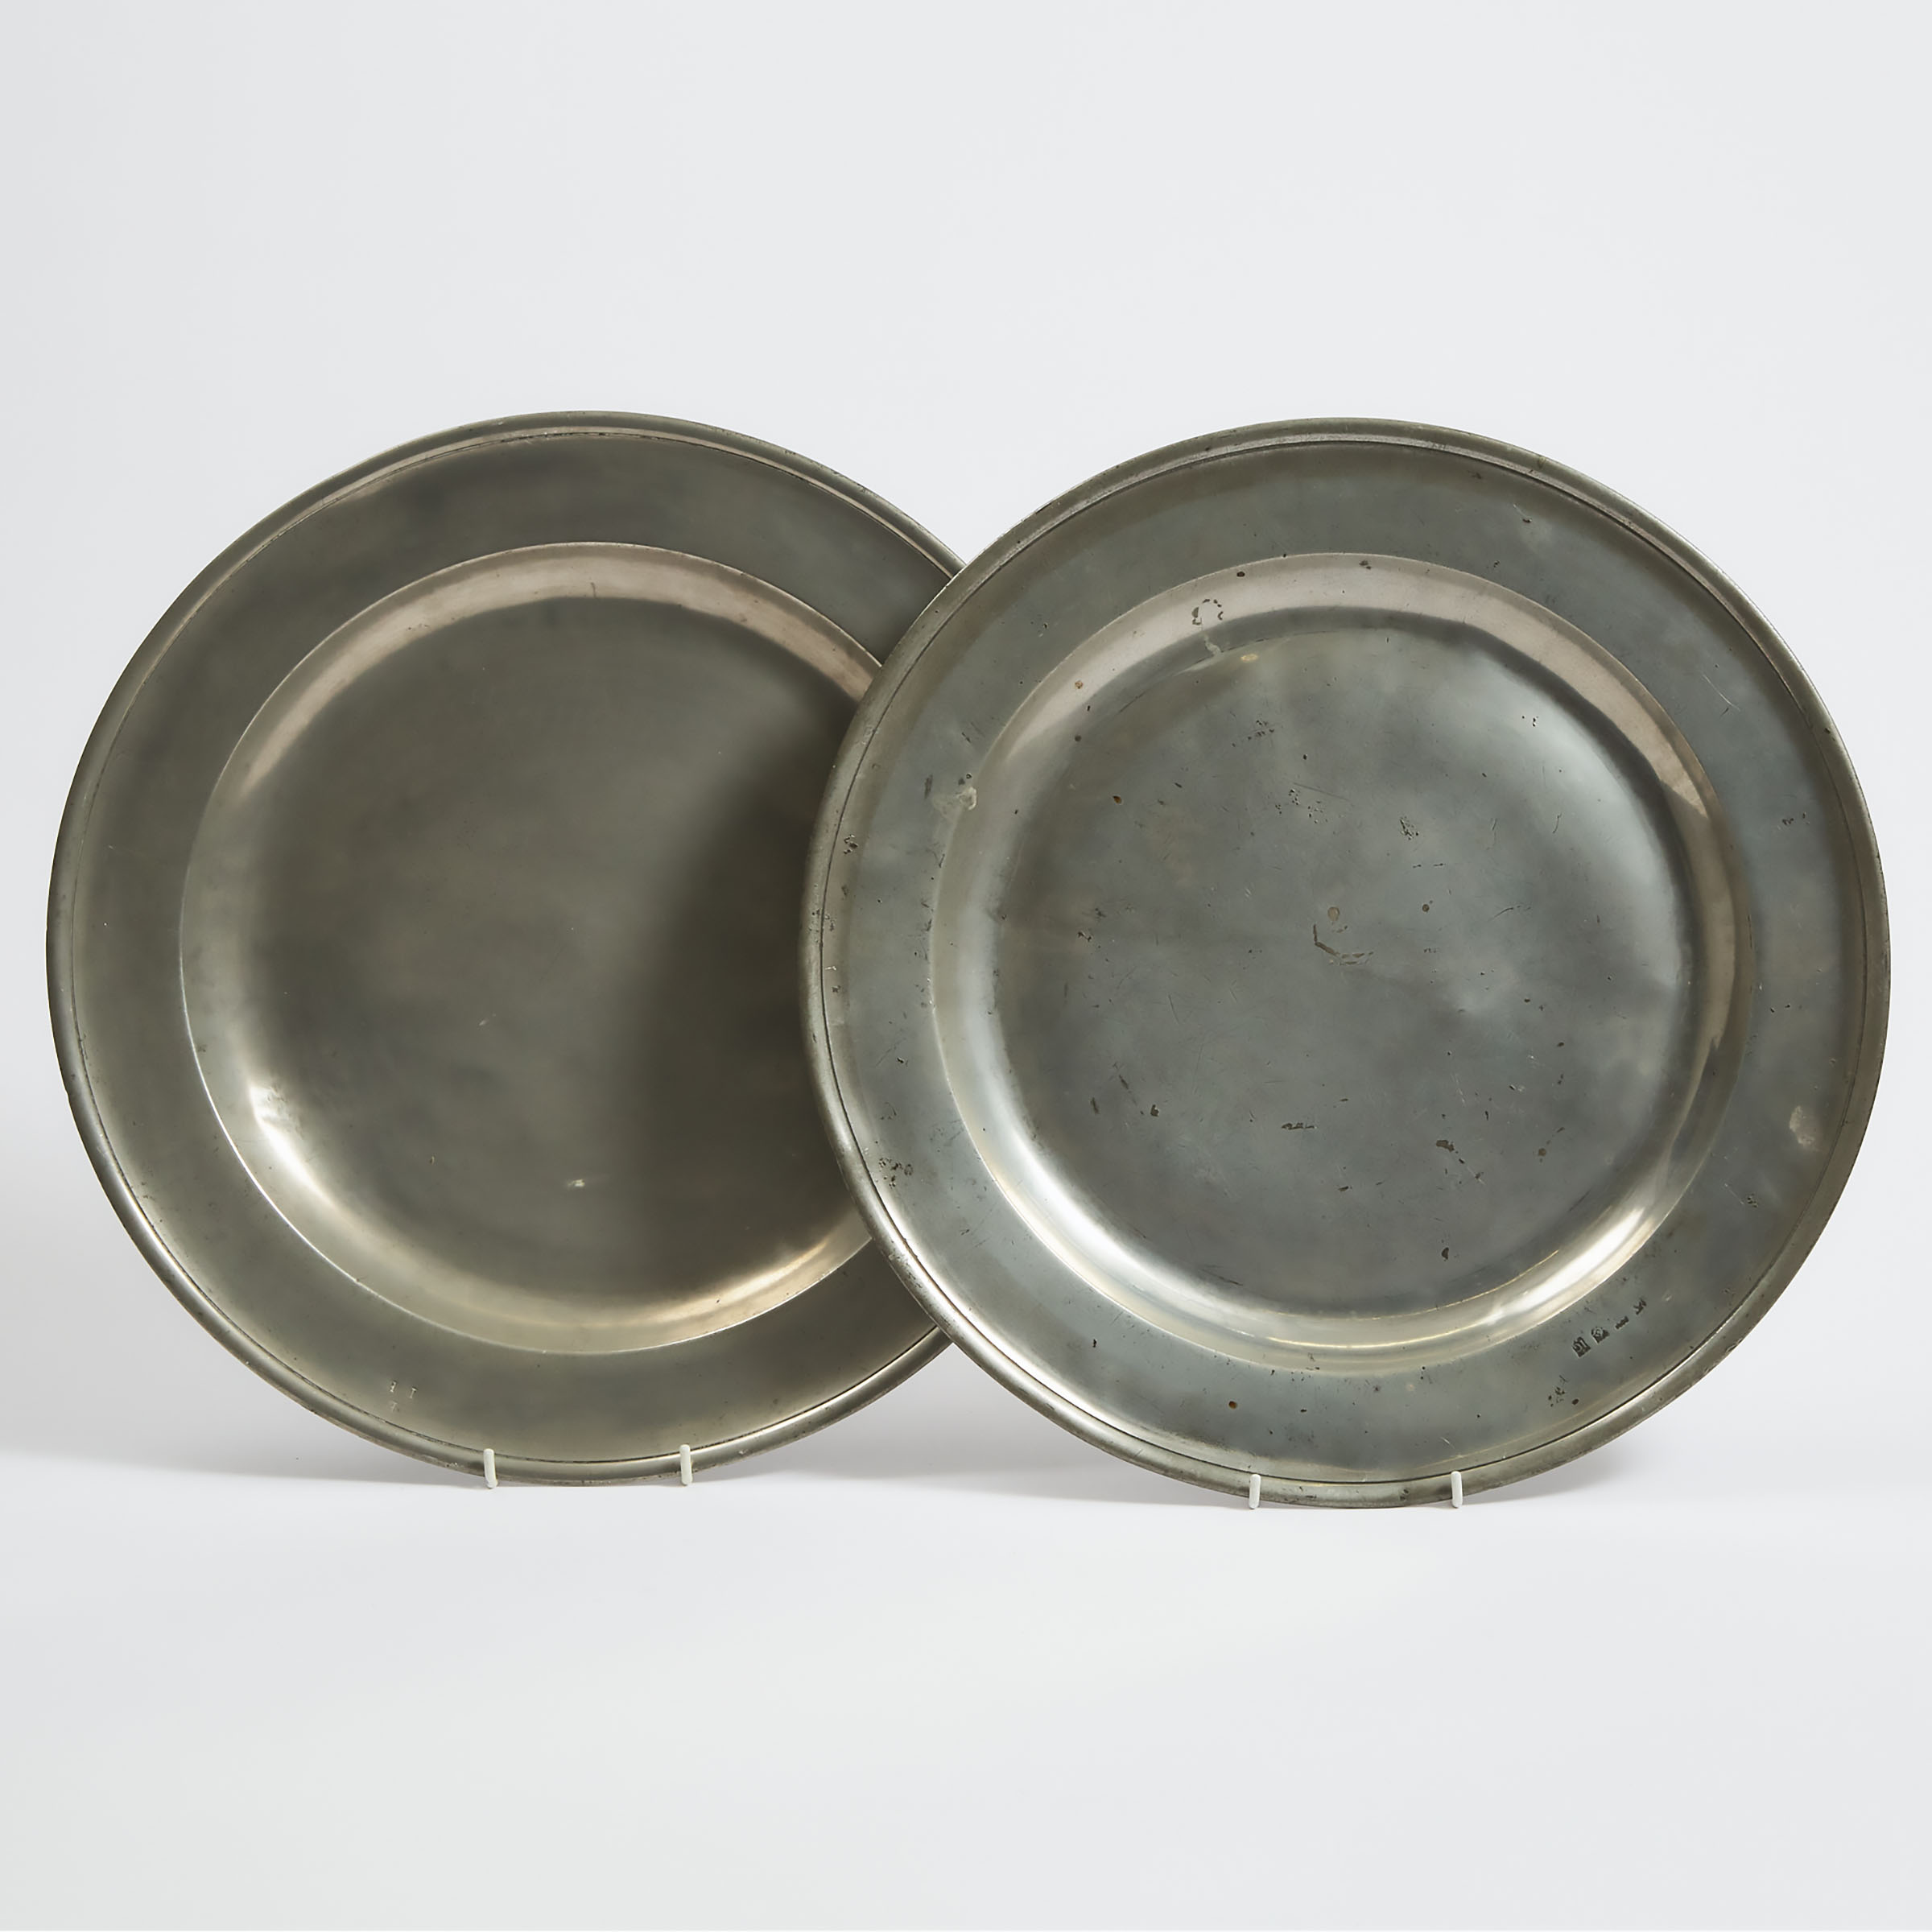 Two English Pewter Single Reed Chargers, 17th and early18th centuries